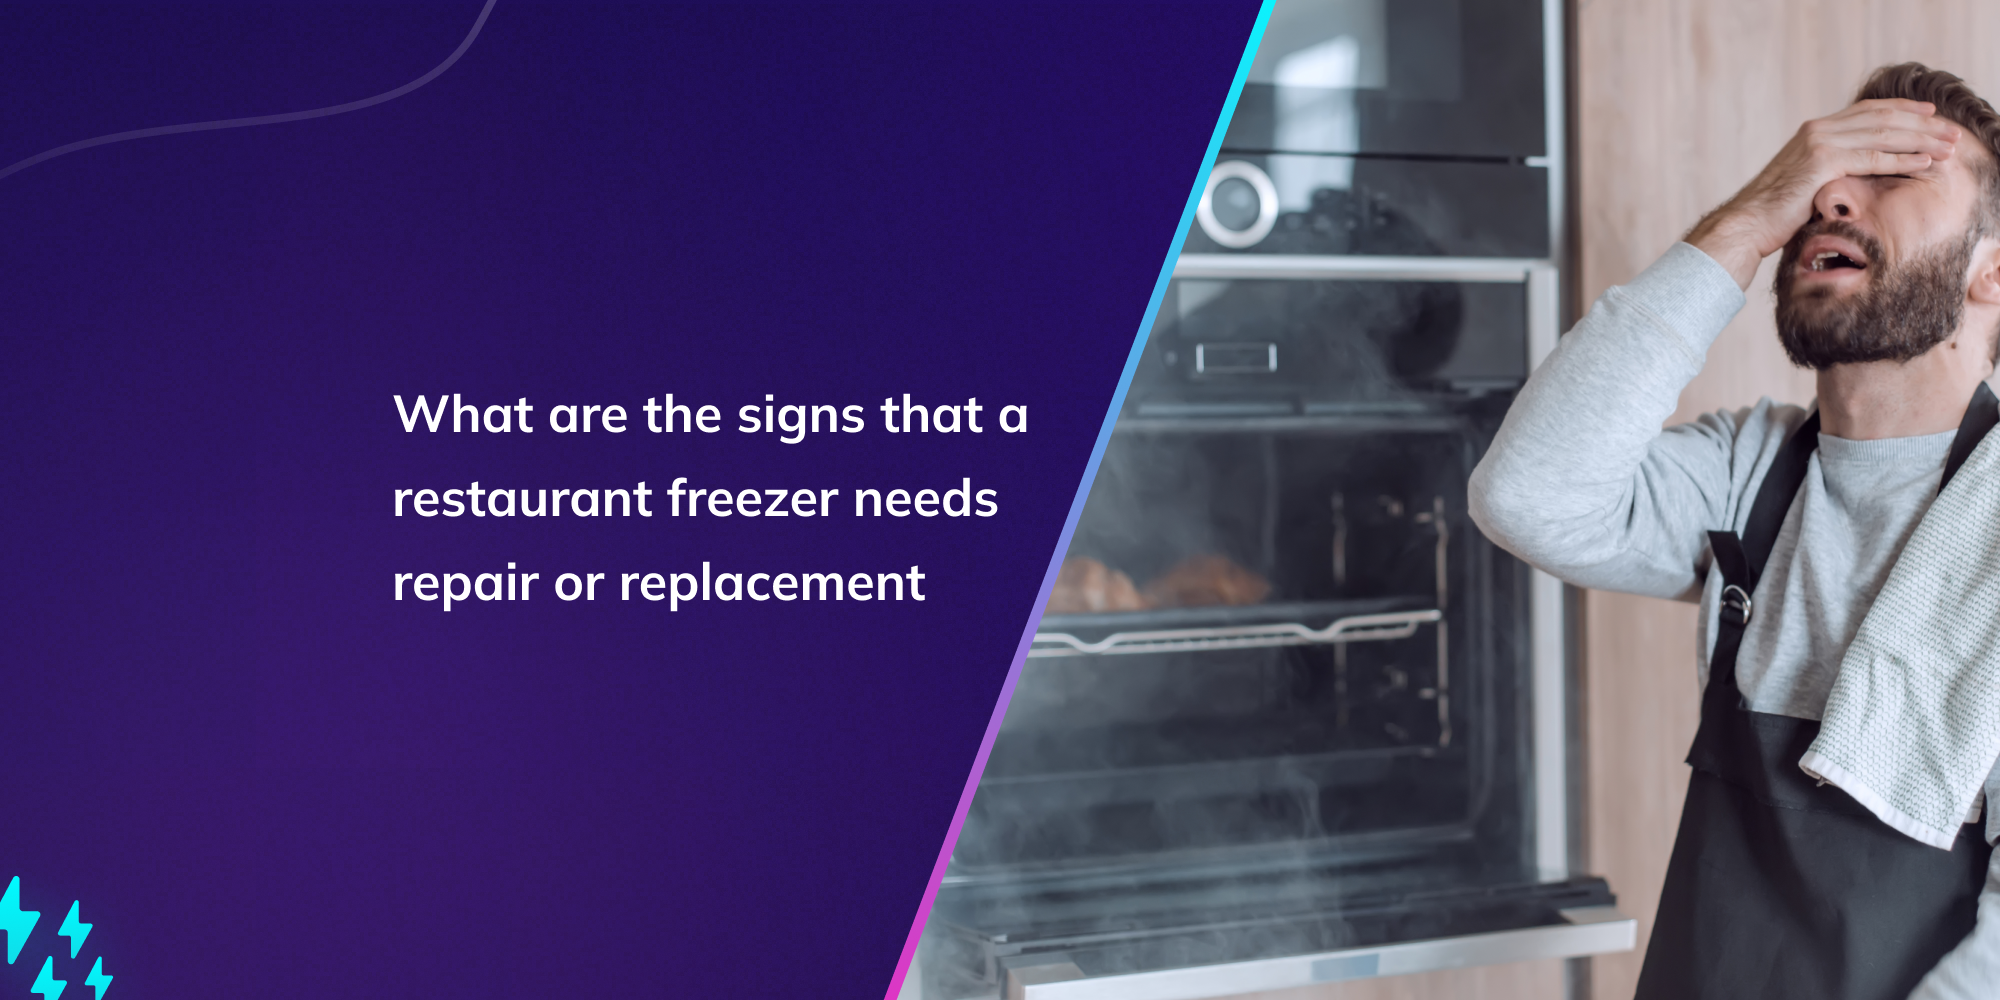 What are the signs that a restaurant freezer needs repair or replacement